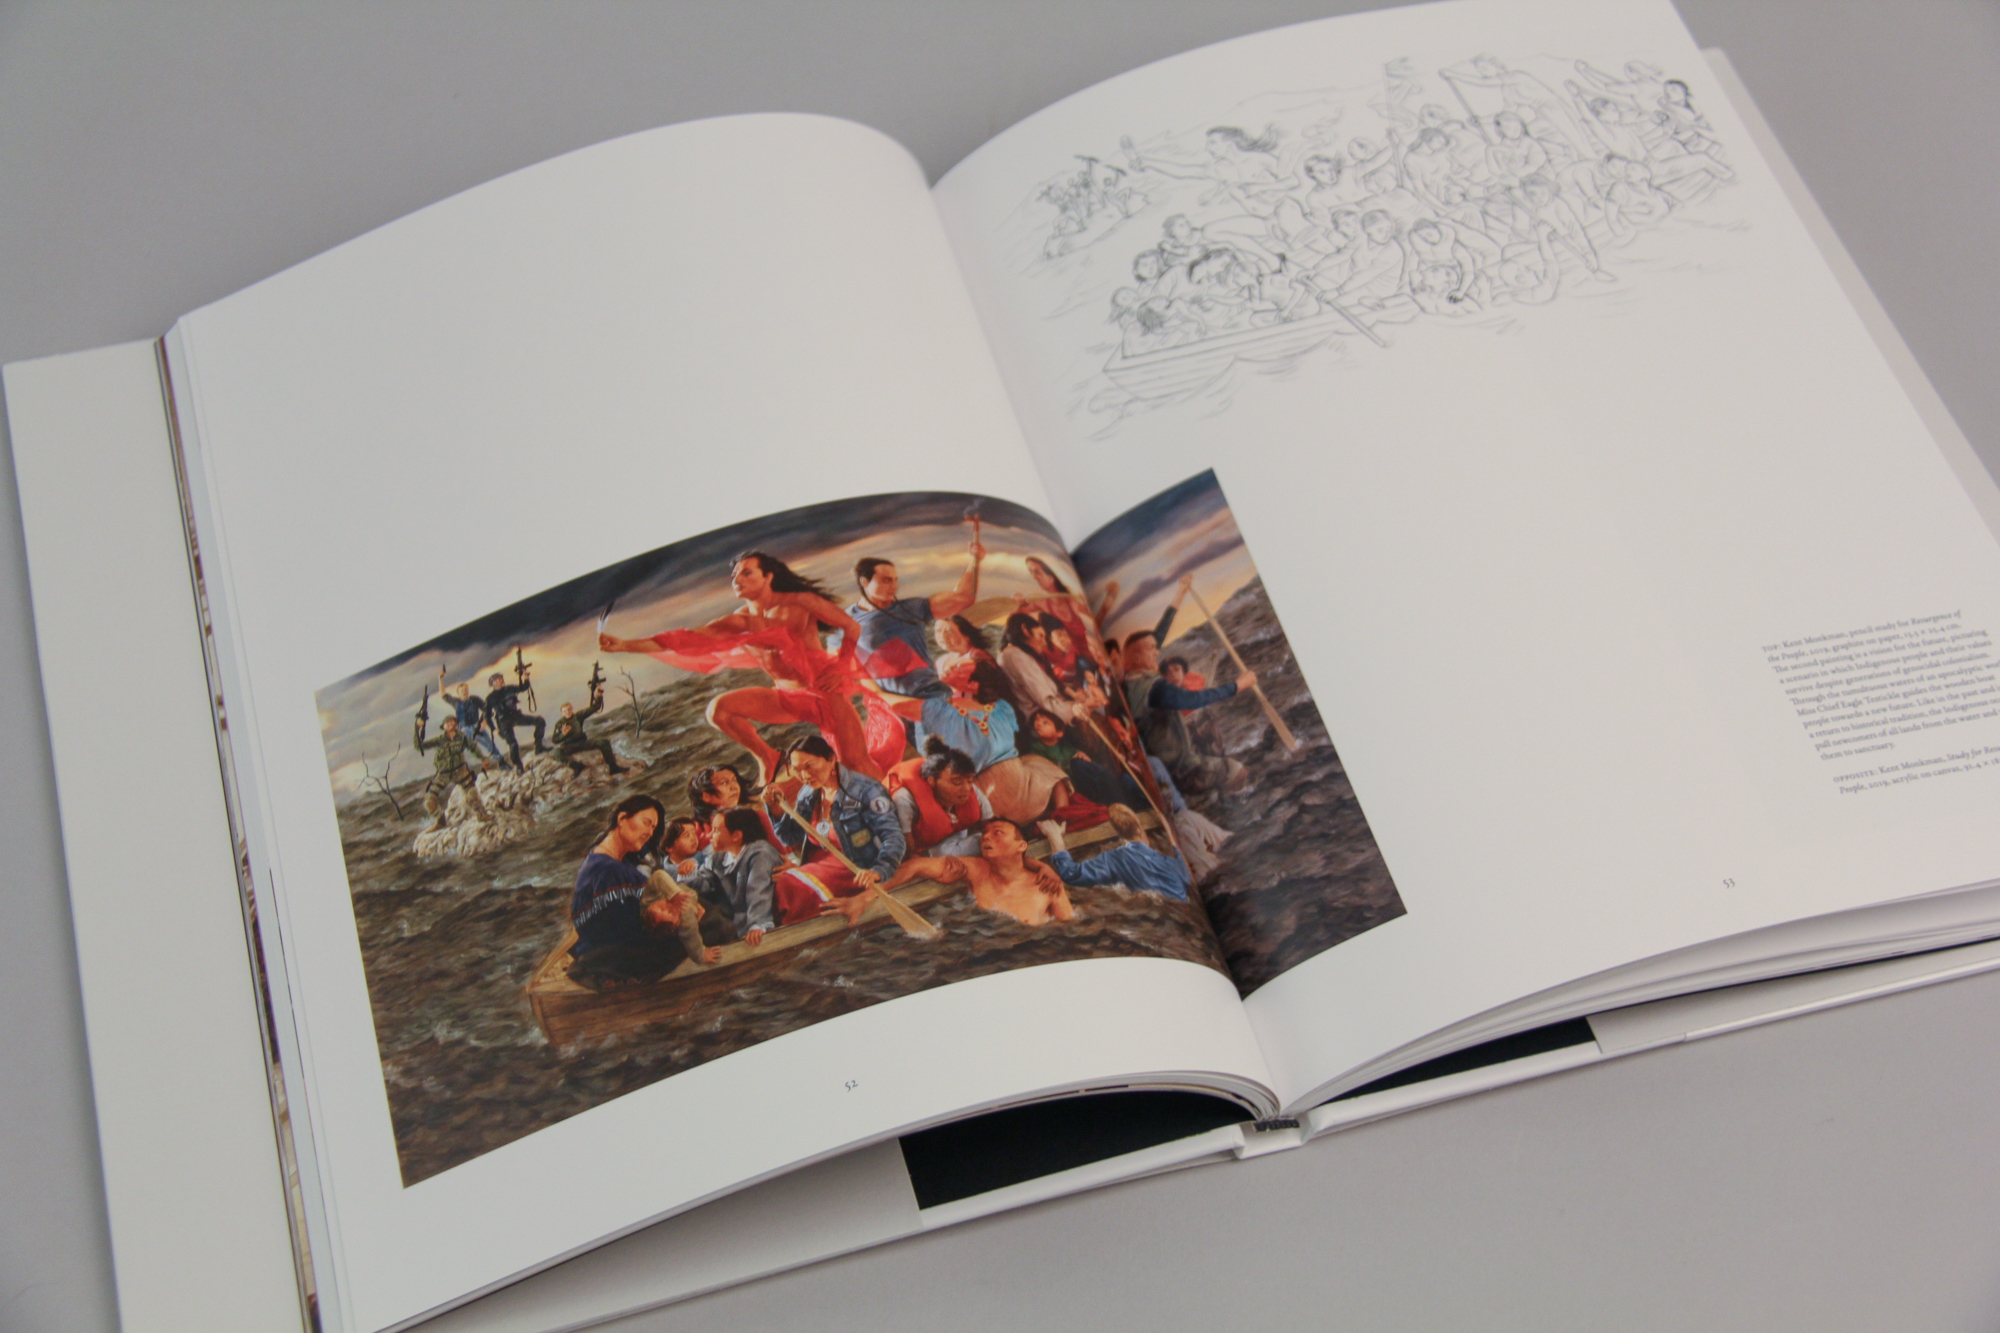 Kent Monkman: Revision and Resistance Product Image 6 of 7